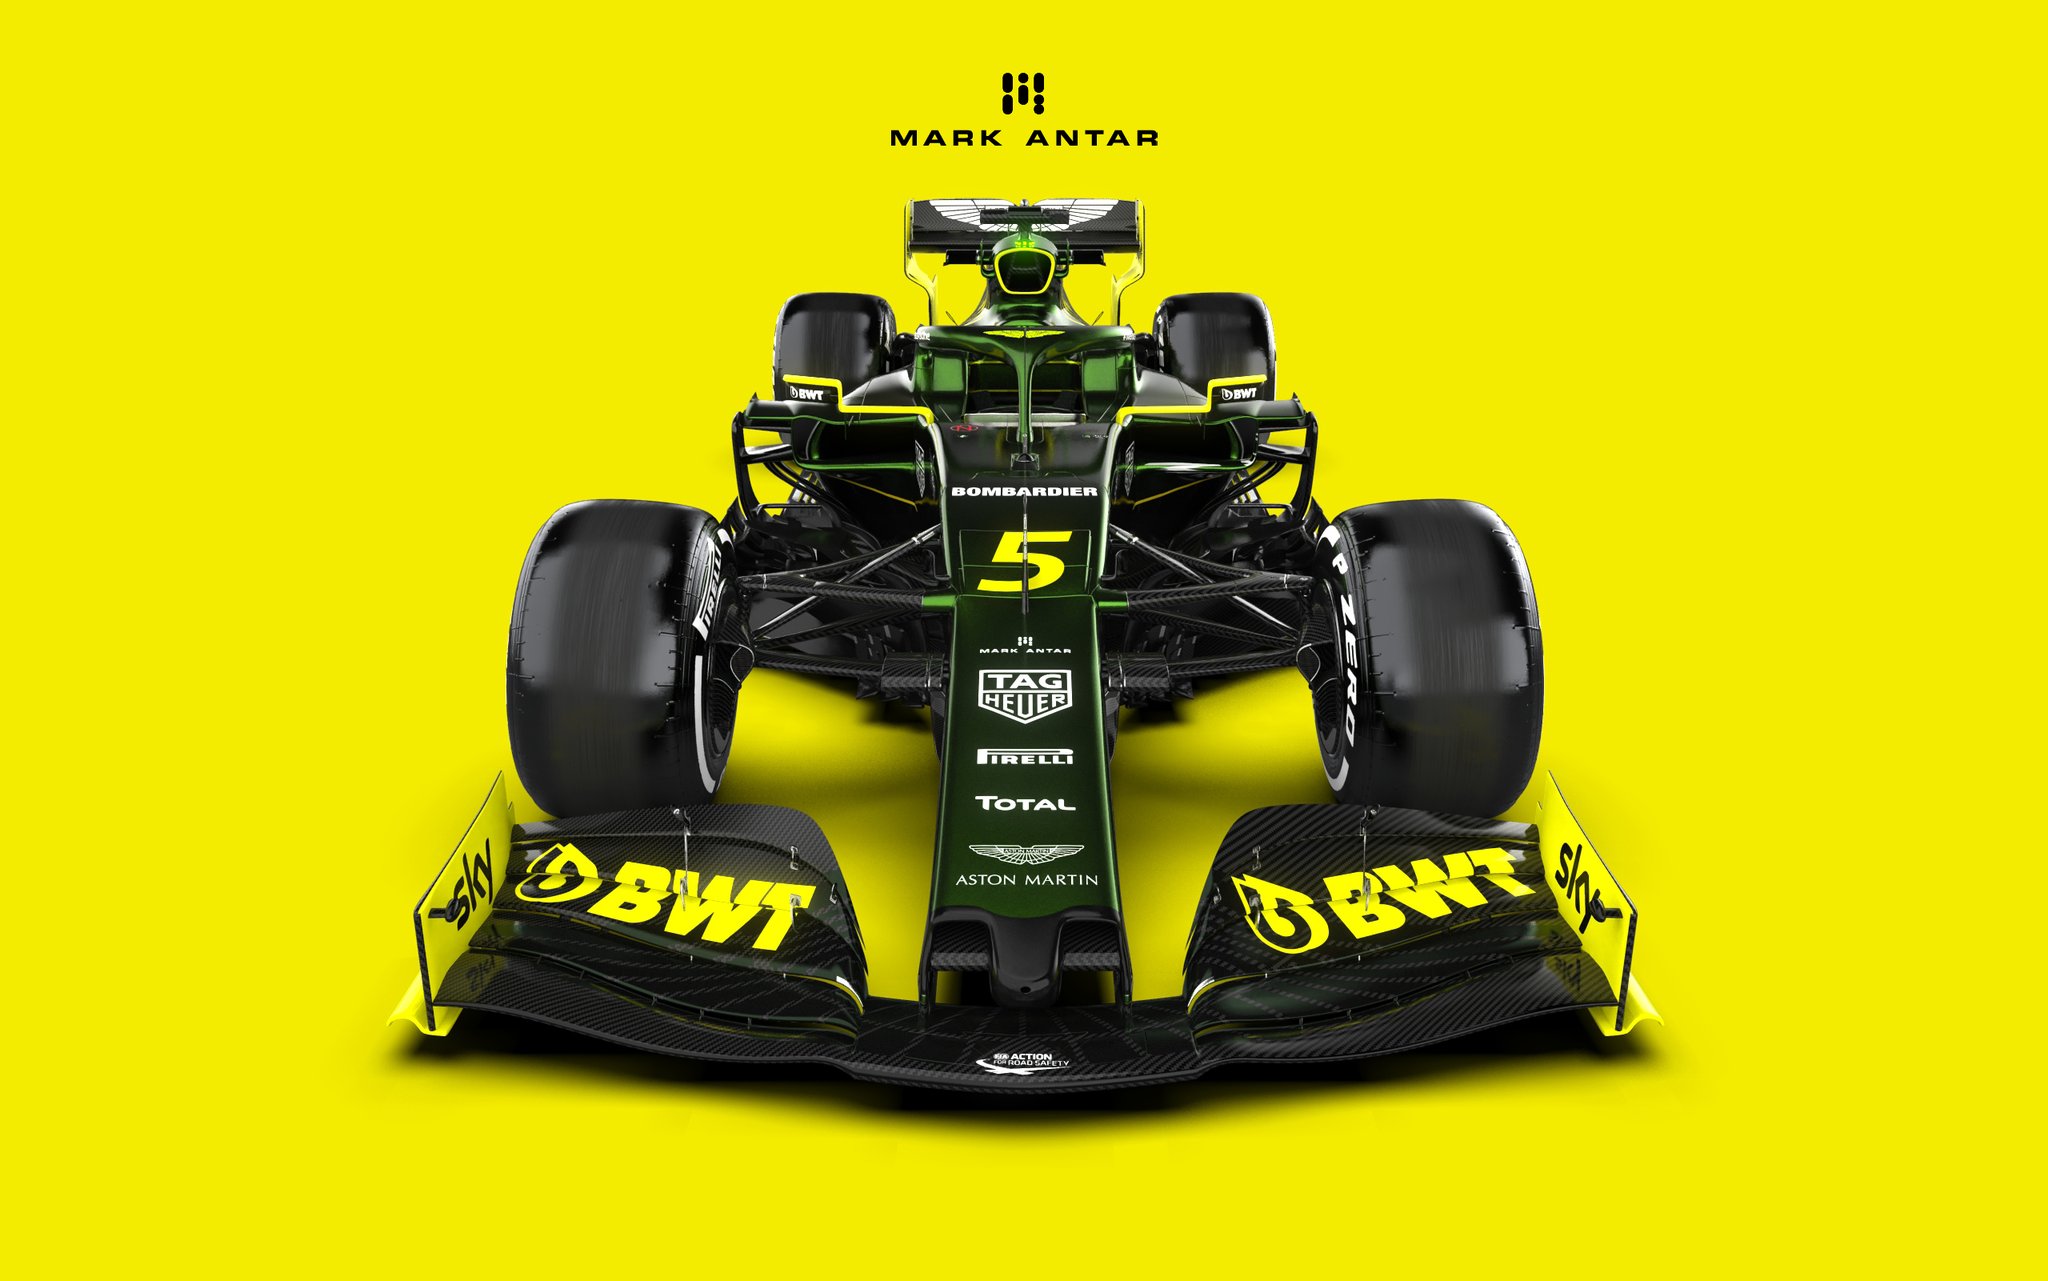 Mark Antar Design on Twitter: "Another 2021 Aston Martin livery concep...